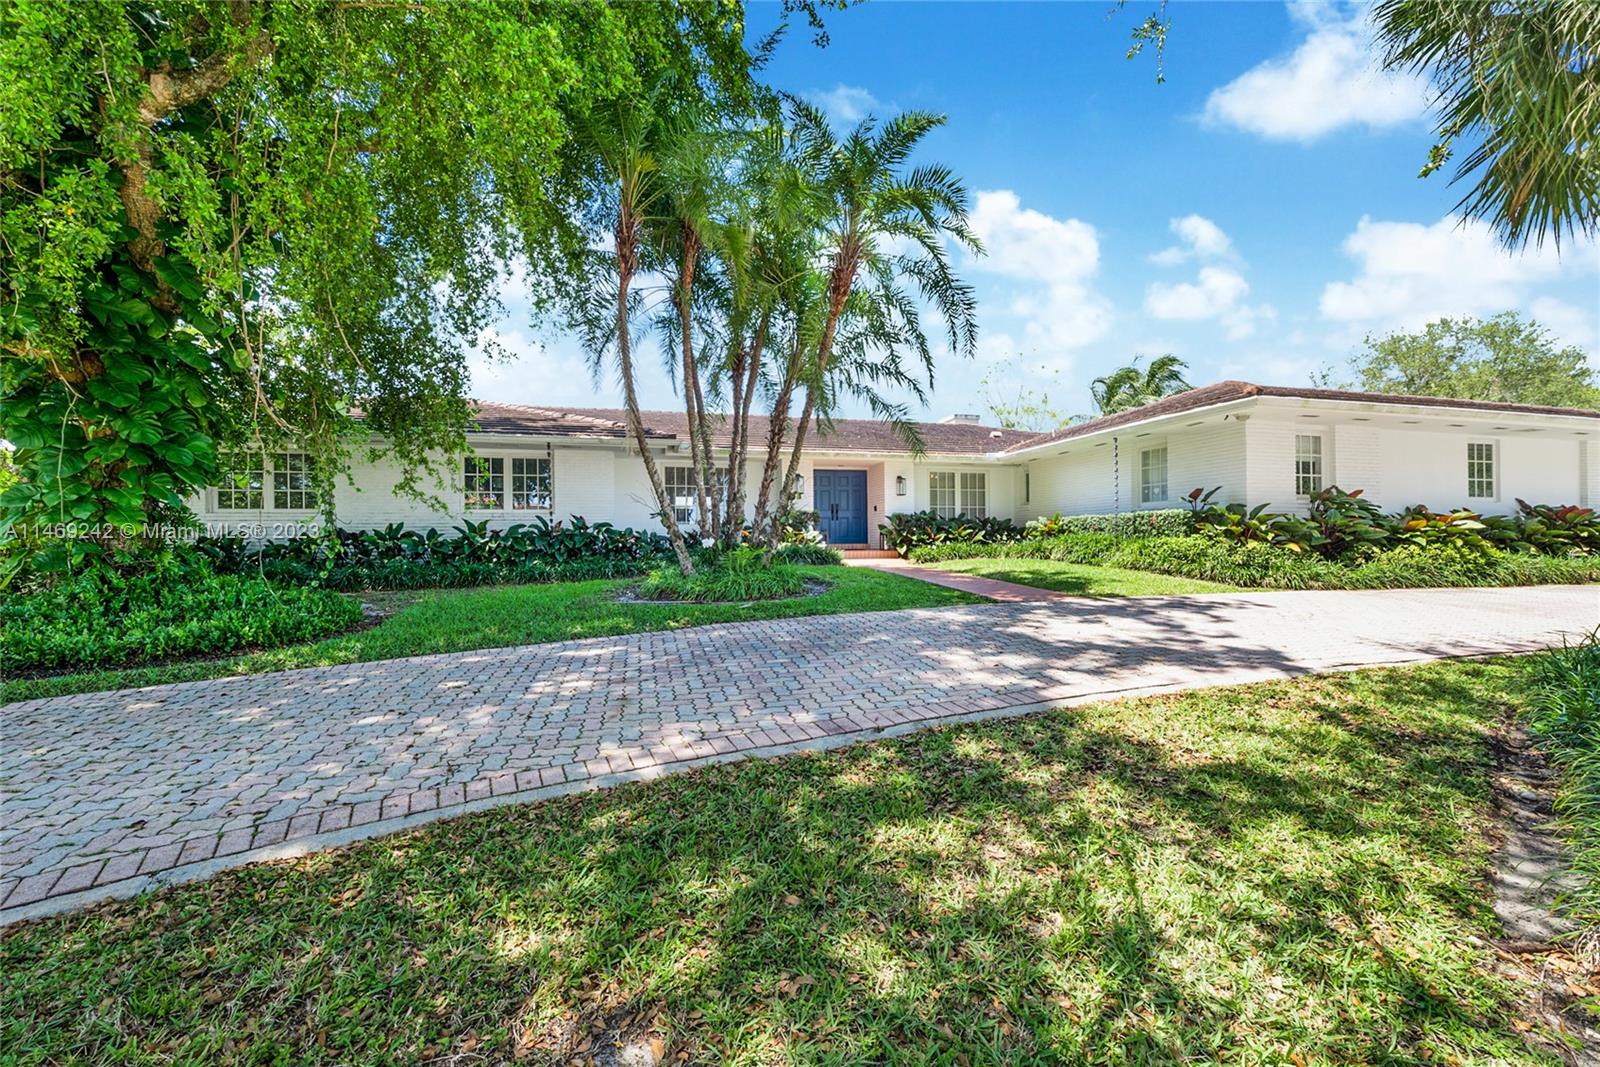 610 Marquesa Dr, Coral Gables, Florida 33156, 5 Bedrooms Bedrooms, ,3 BathroomsBathrooms,Residential,For Sale,610 Marquesa Dr,A11469242